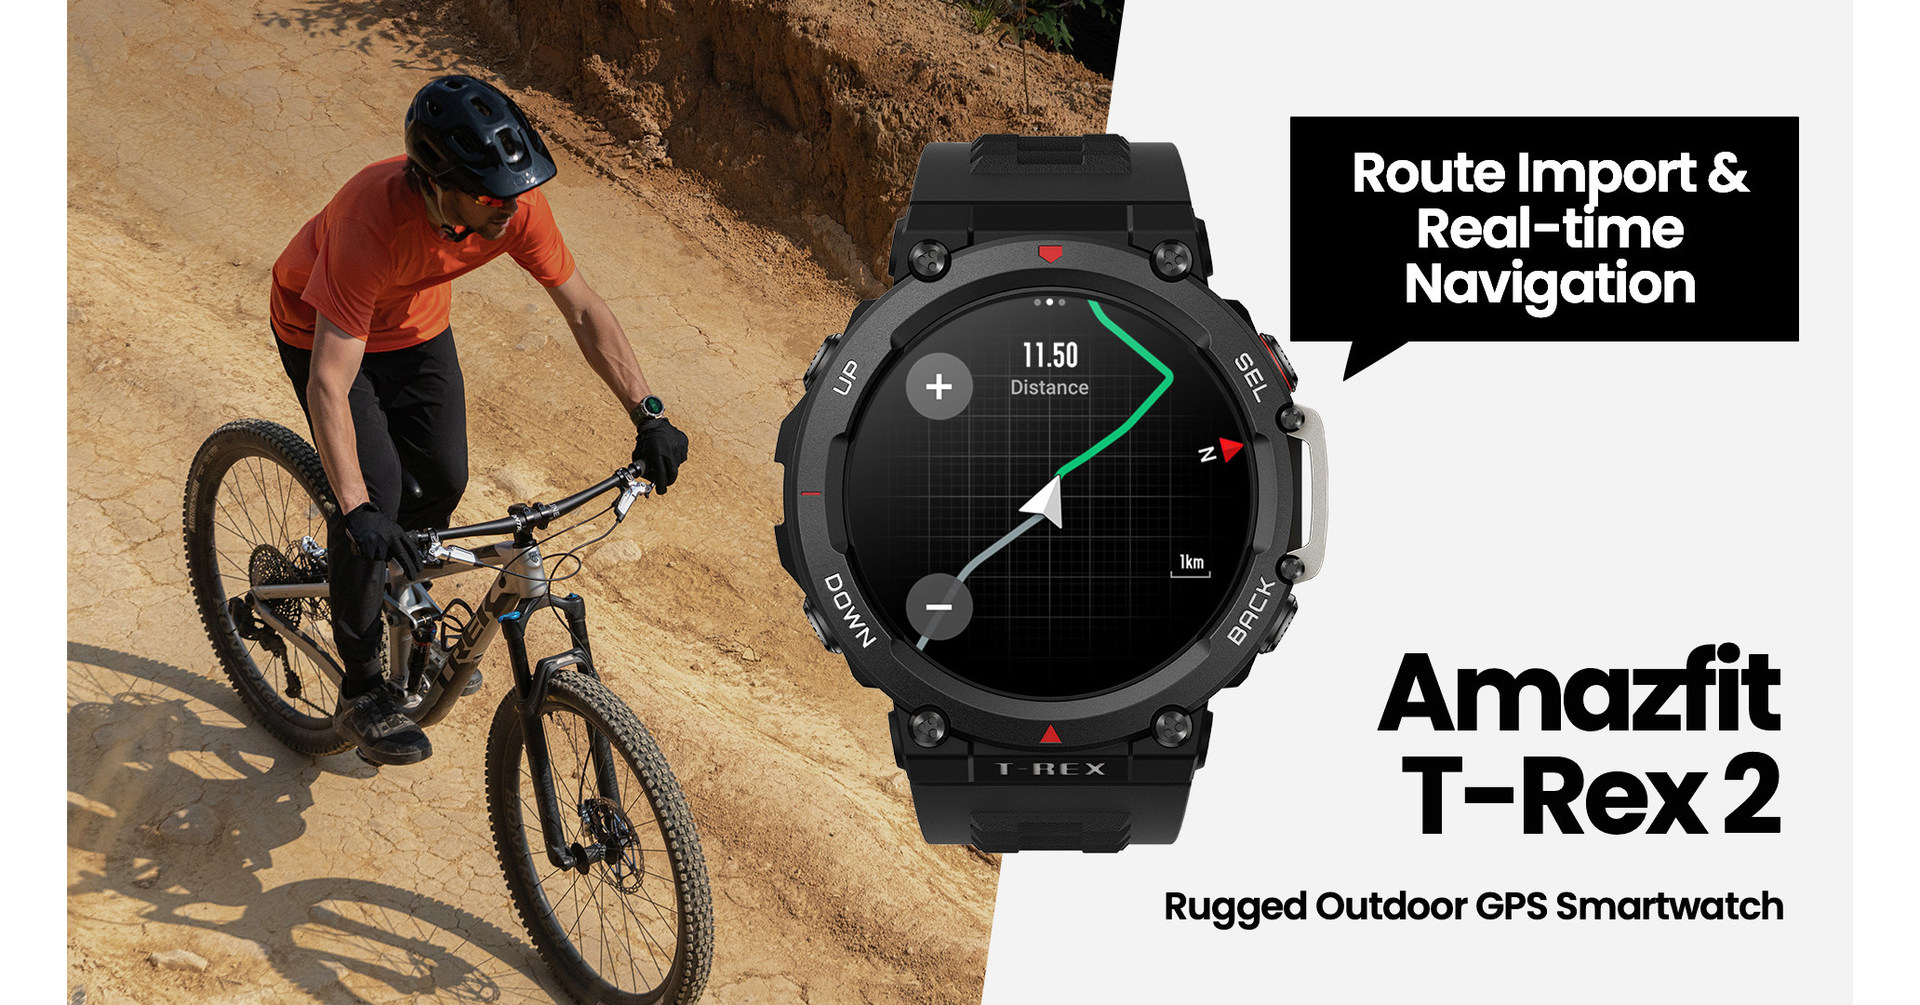 LATEST AMAZFIT T-REX 2 UPDATE INTRODUCES ROUTE IMPORT & REAL-TIME